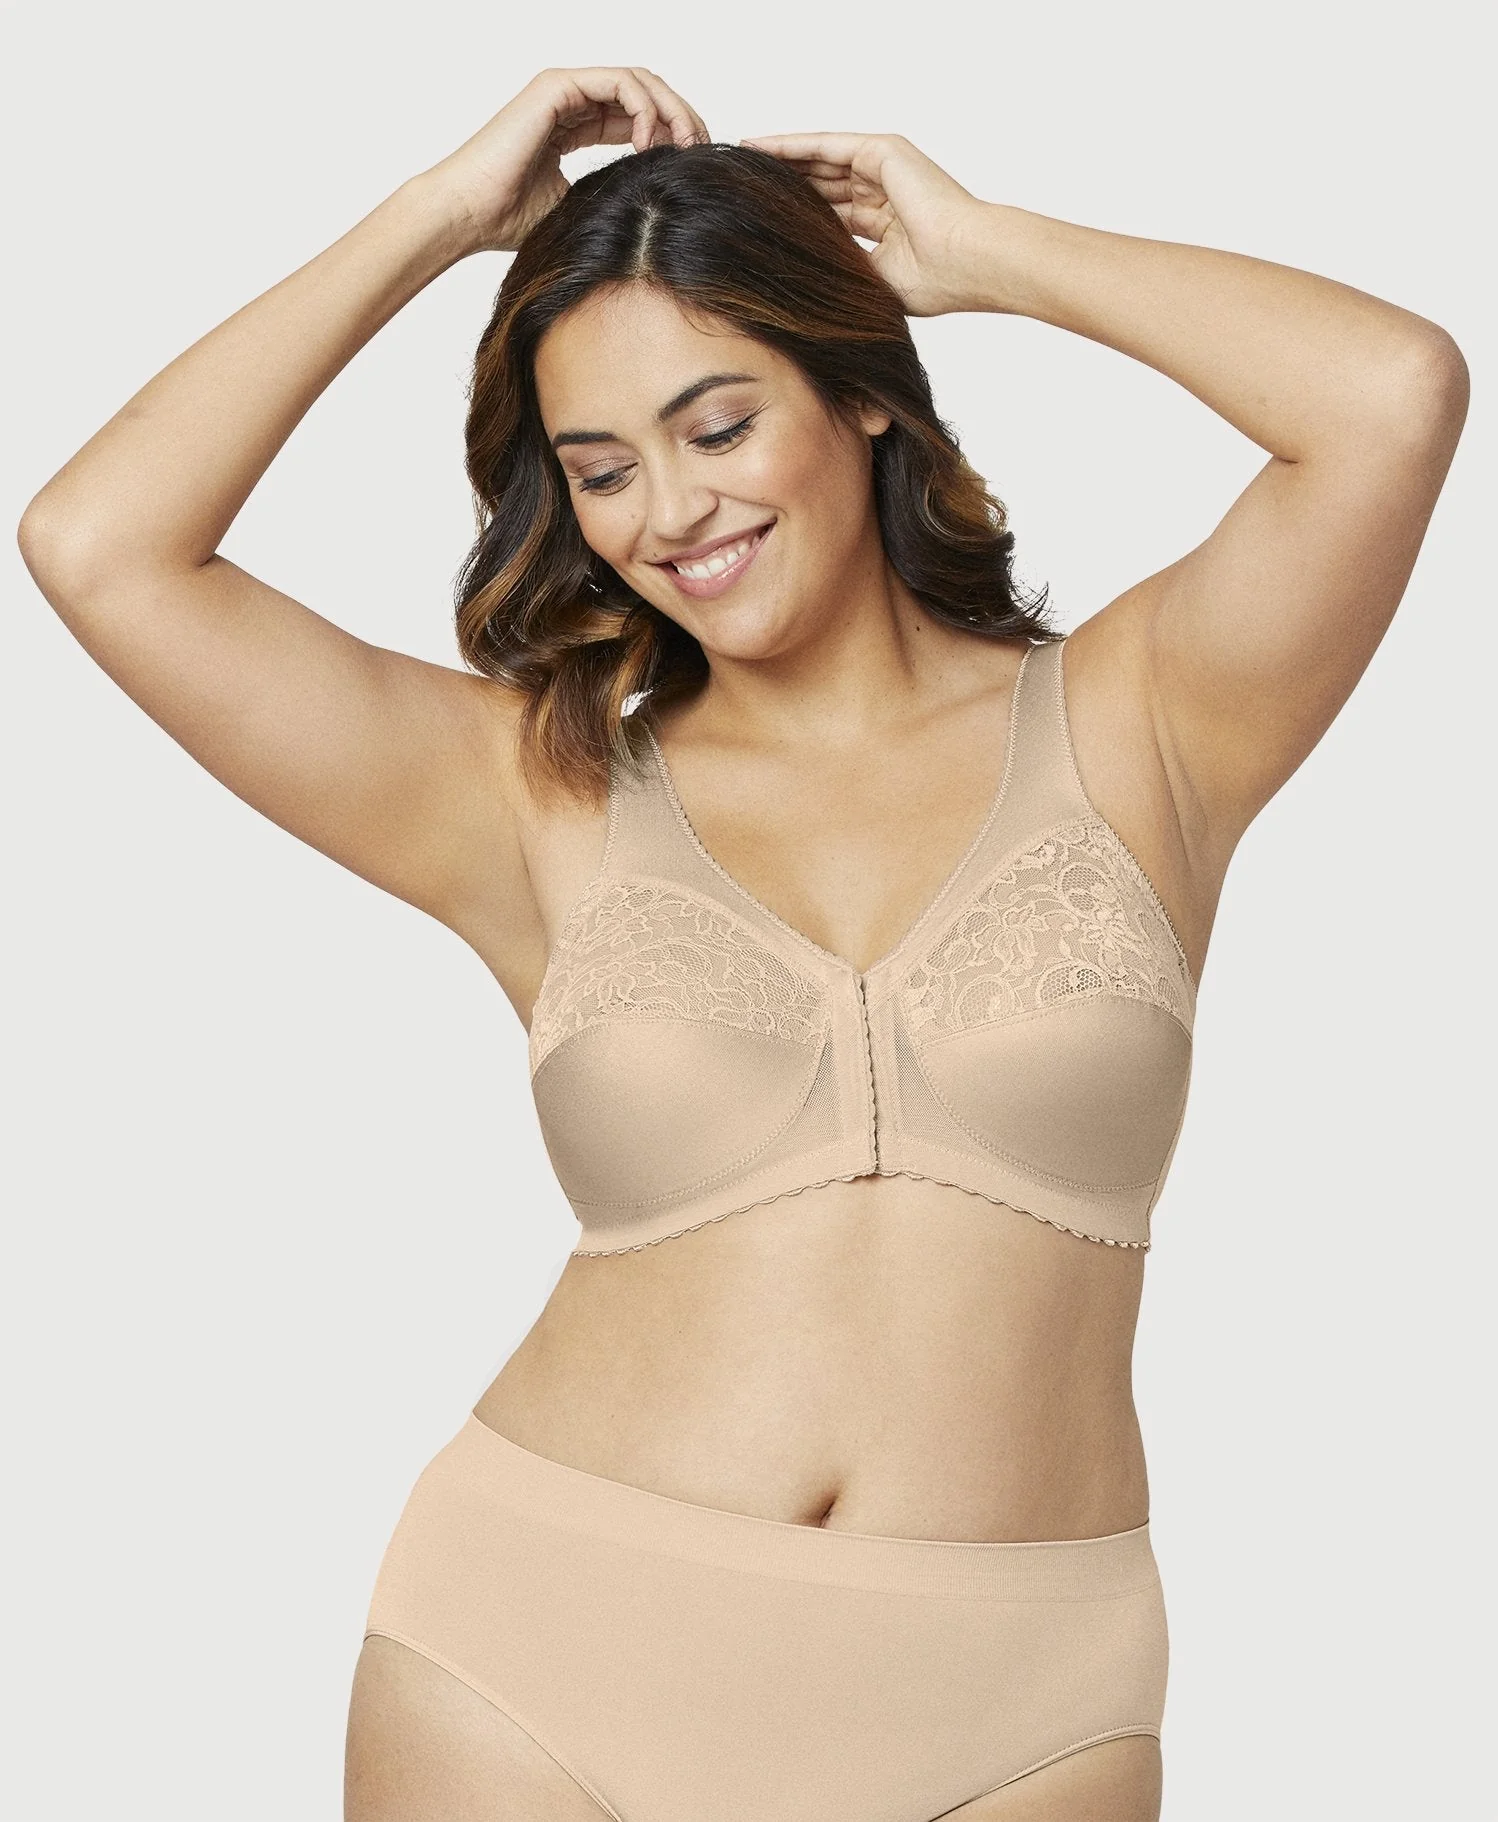 Front Closure Bras are Great for Women Who Want an Easier Way to Fasten